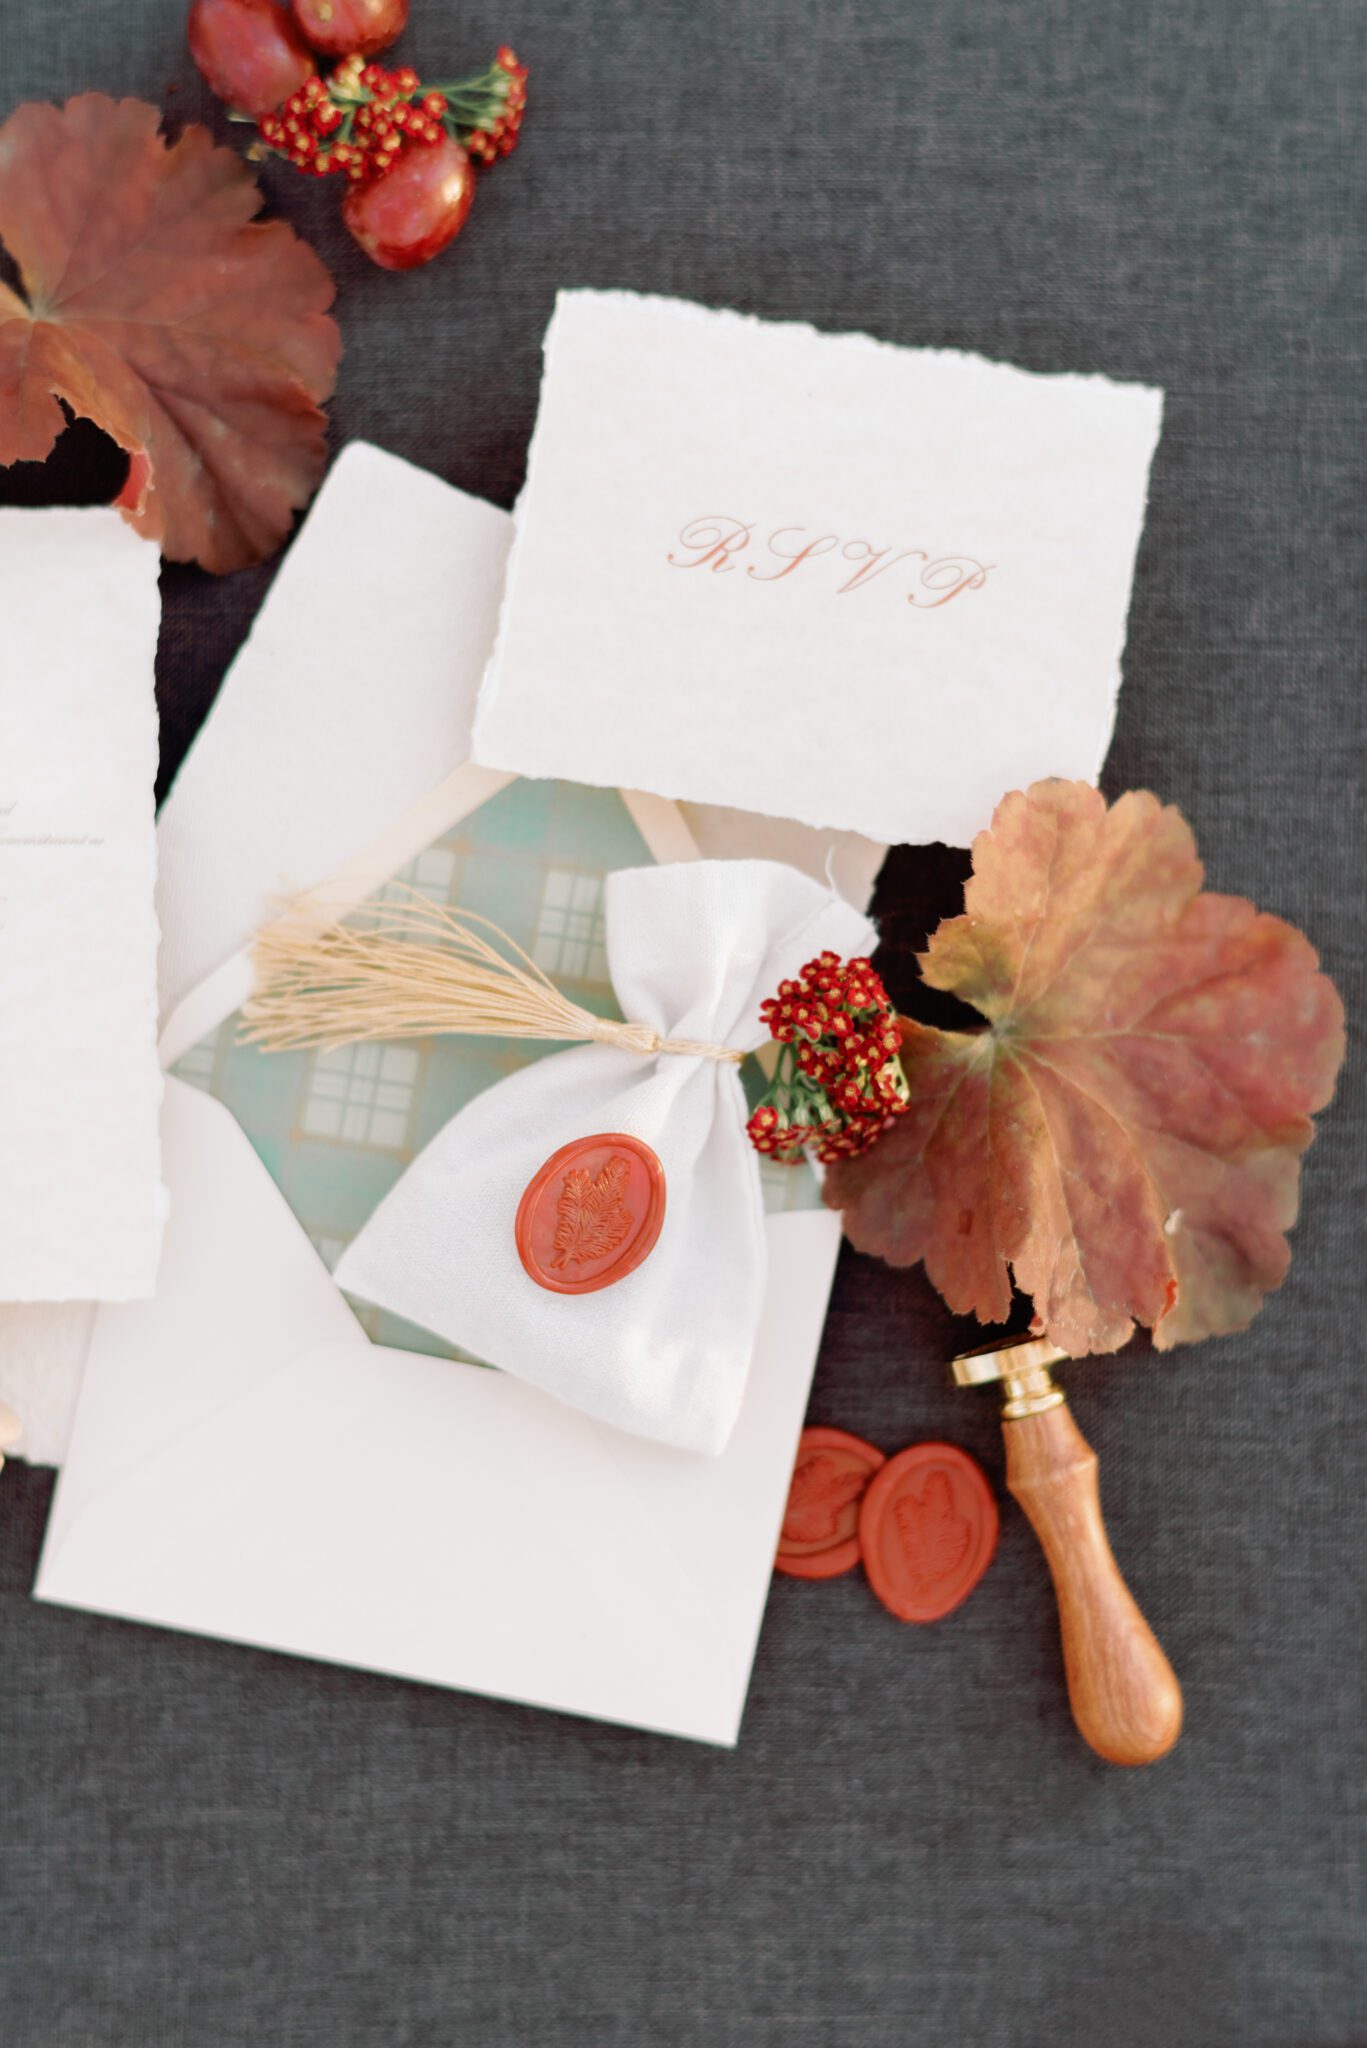 Wedding invitation flatlay with fall wedding stationery featuring handmade paper with a hand deckled edge and crimson wax seals with gold tassel accents.
